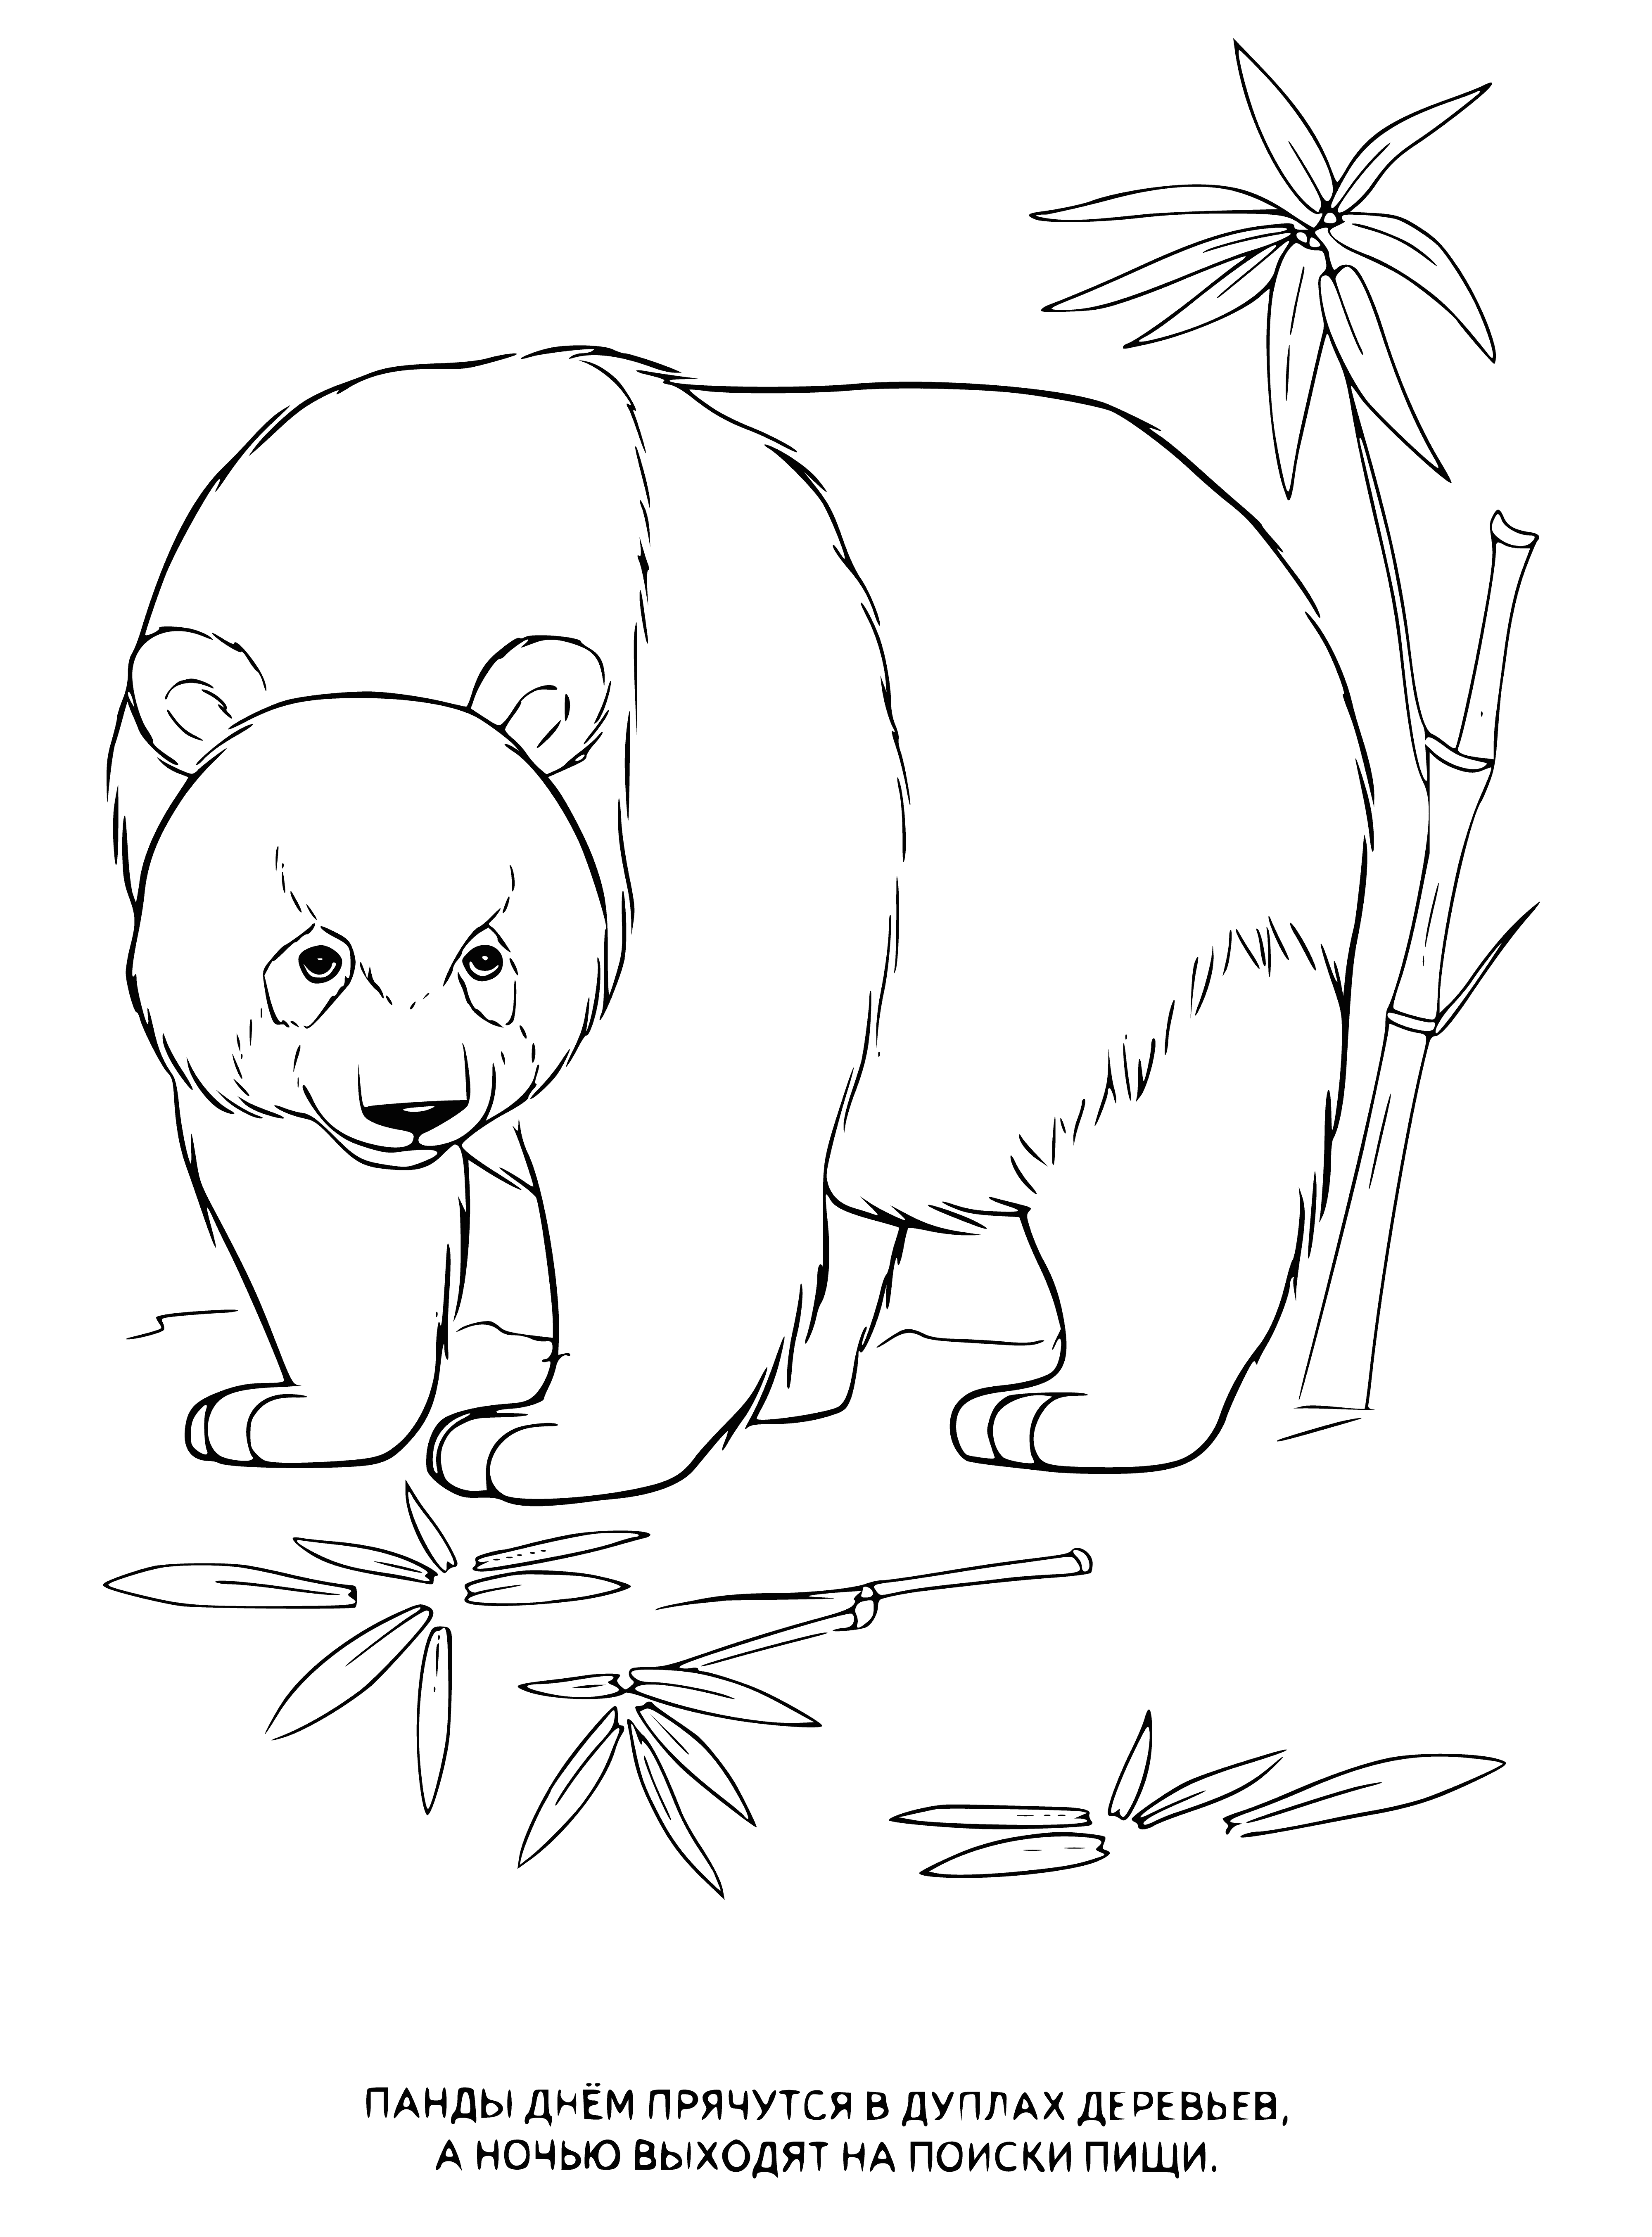 coloring page: Large black & white animal on a tree branch, big head & small ears, body covered in fur, small black tail.